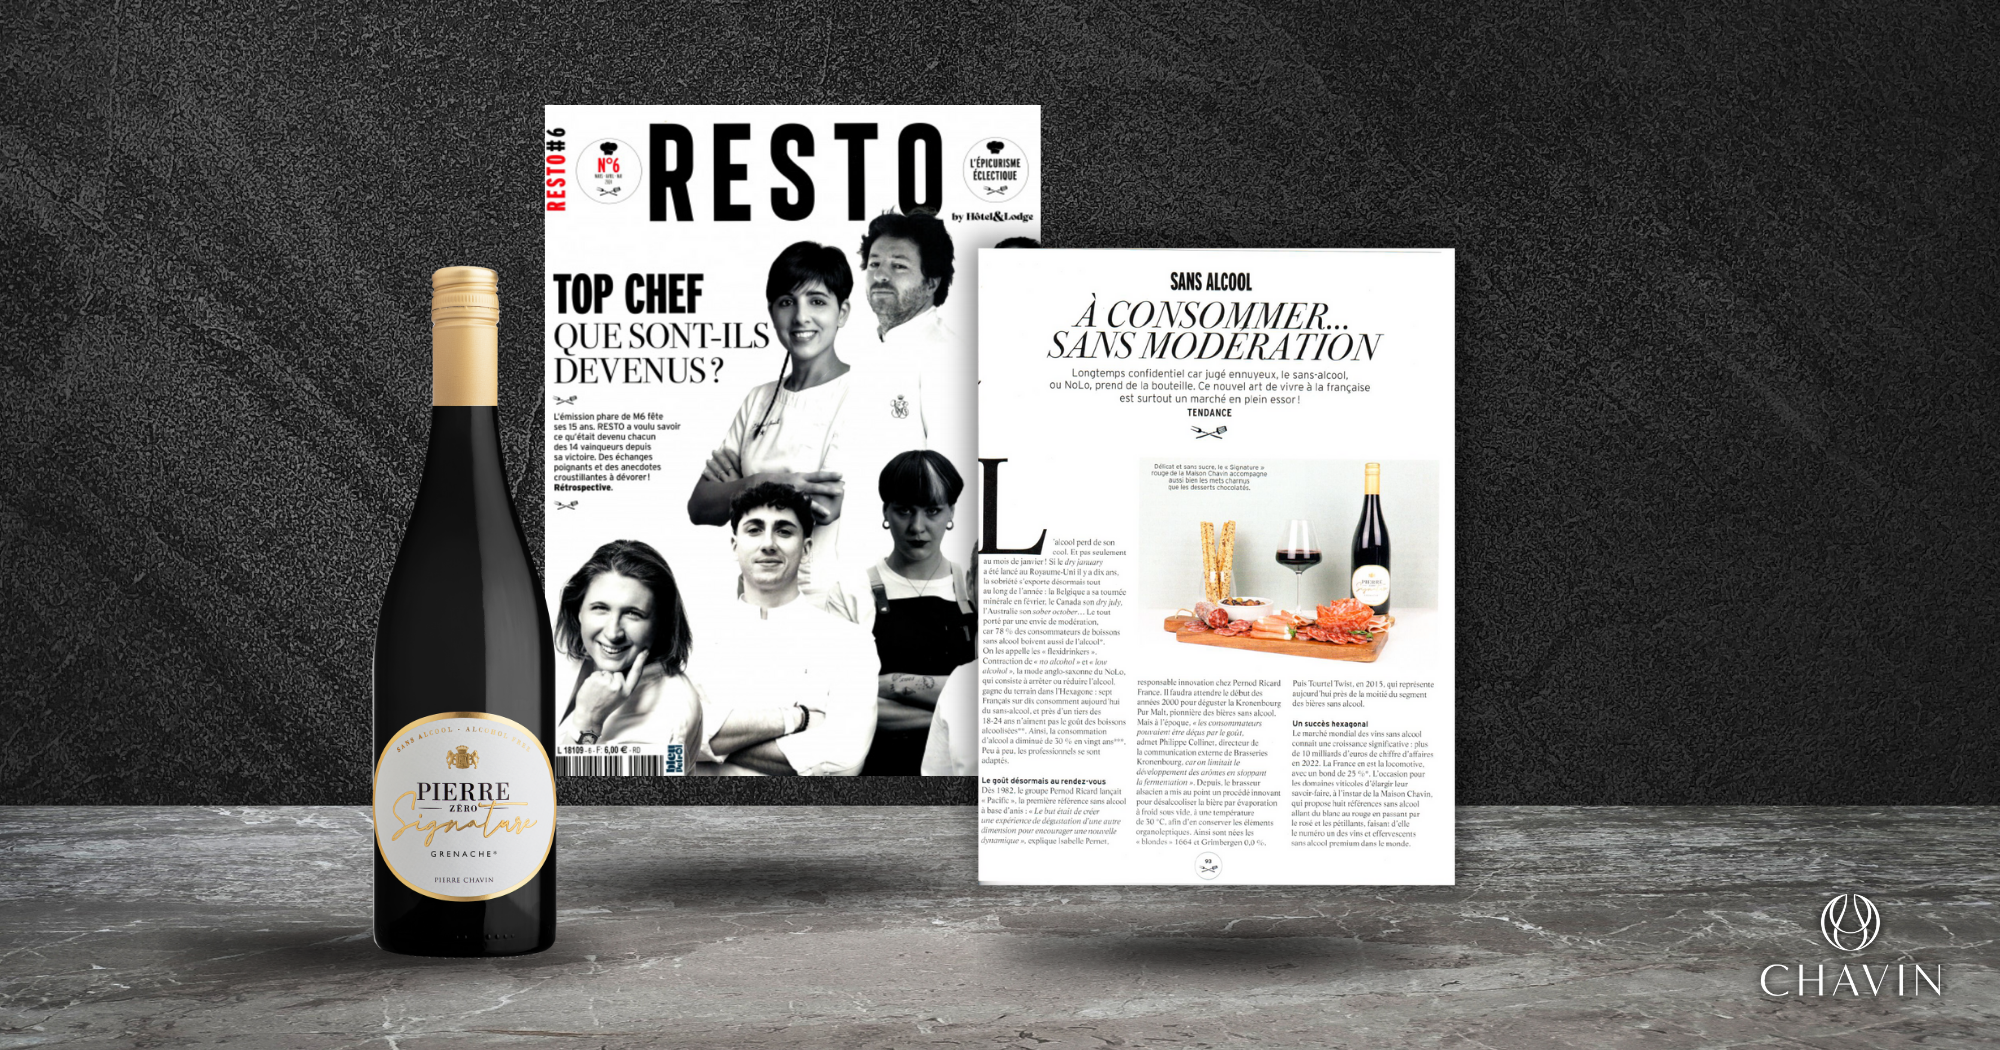 Chavin - Chavin Featured in “RESTO” by Hôtel&Lodge Magazine for its Alcohol-Free Offerings